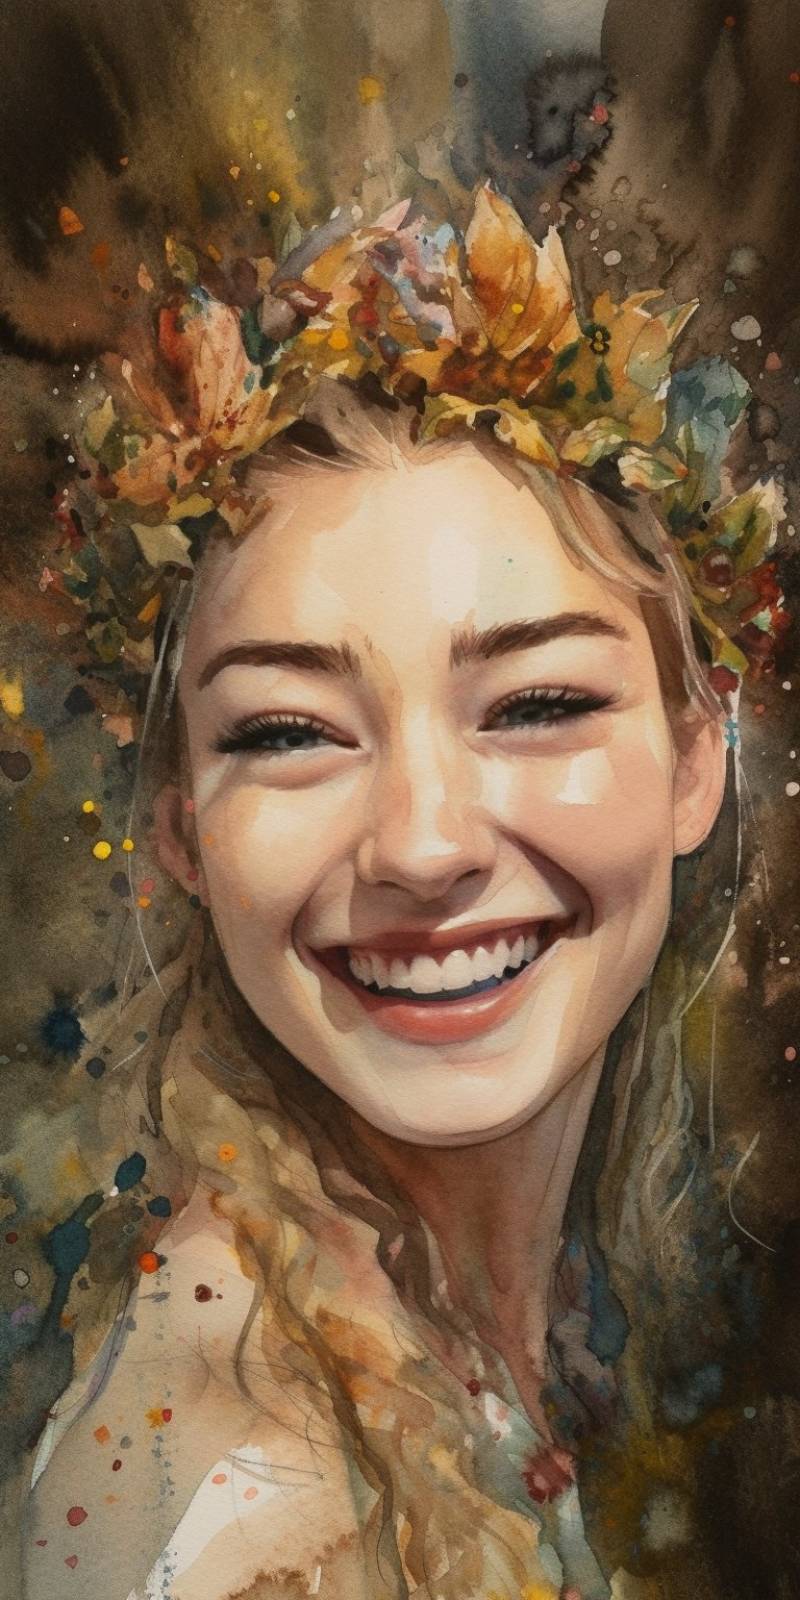 Happy face smiling fairy forest princess gigi hadid aerial picture astounding showcasing the effects wild of nature on la happy face smiling fairy forest princess gigi hadid